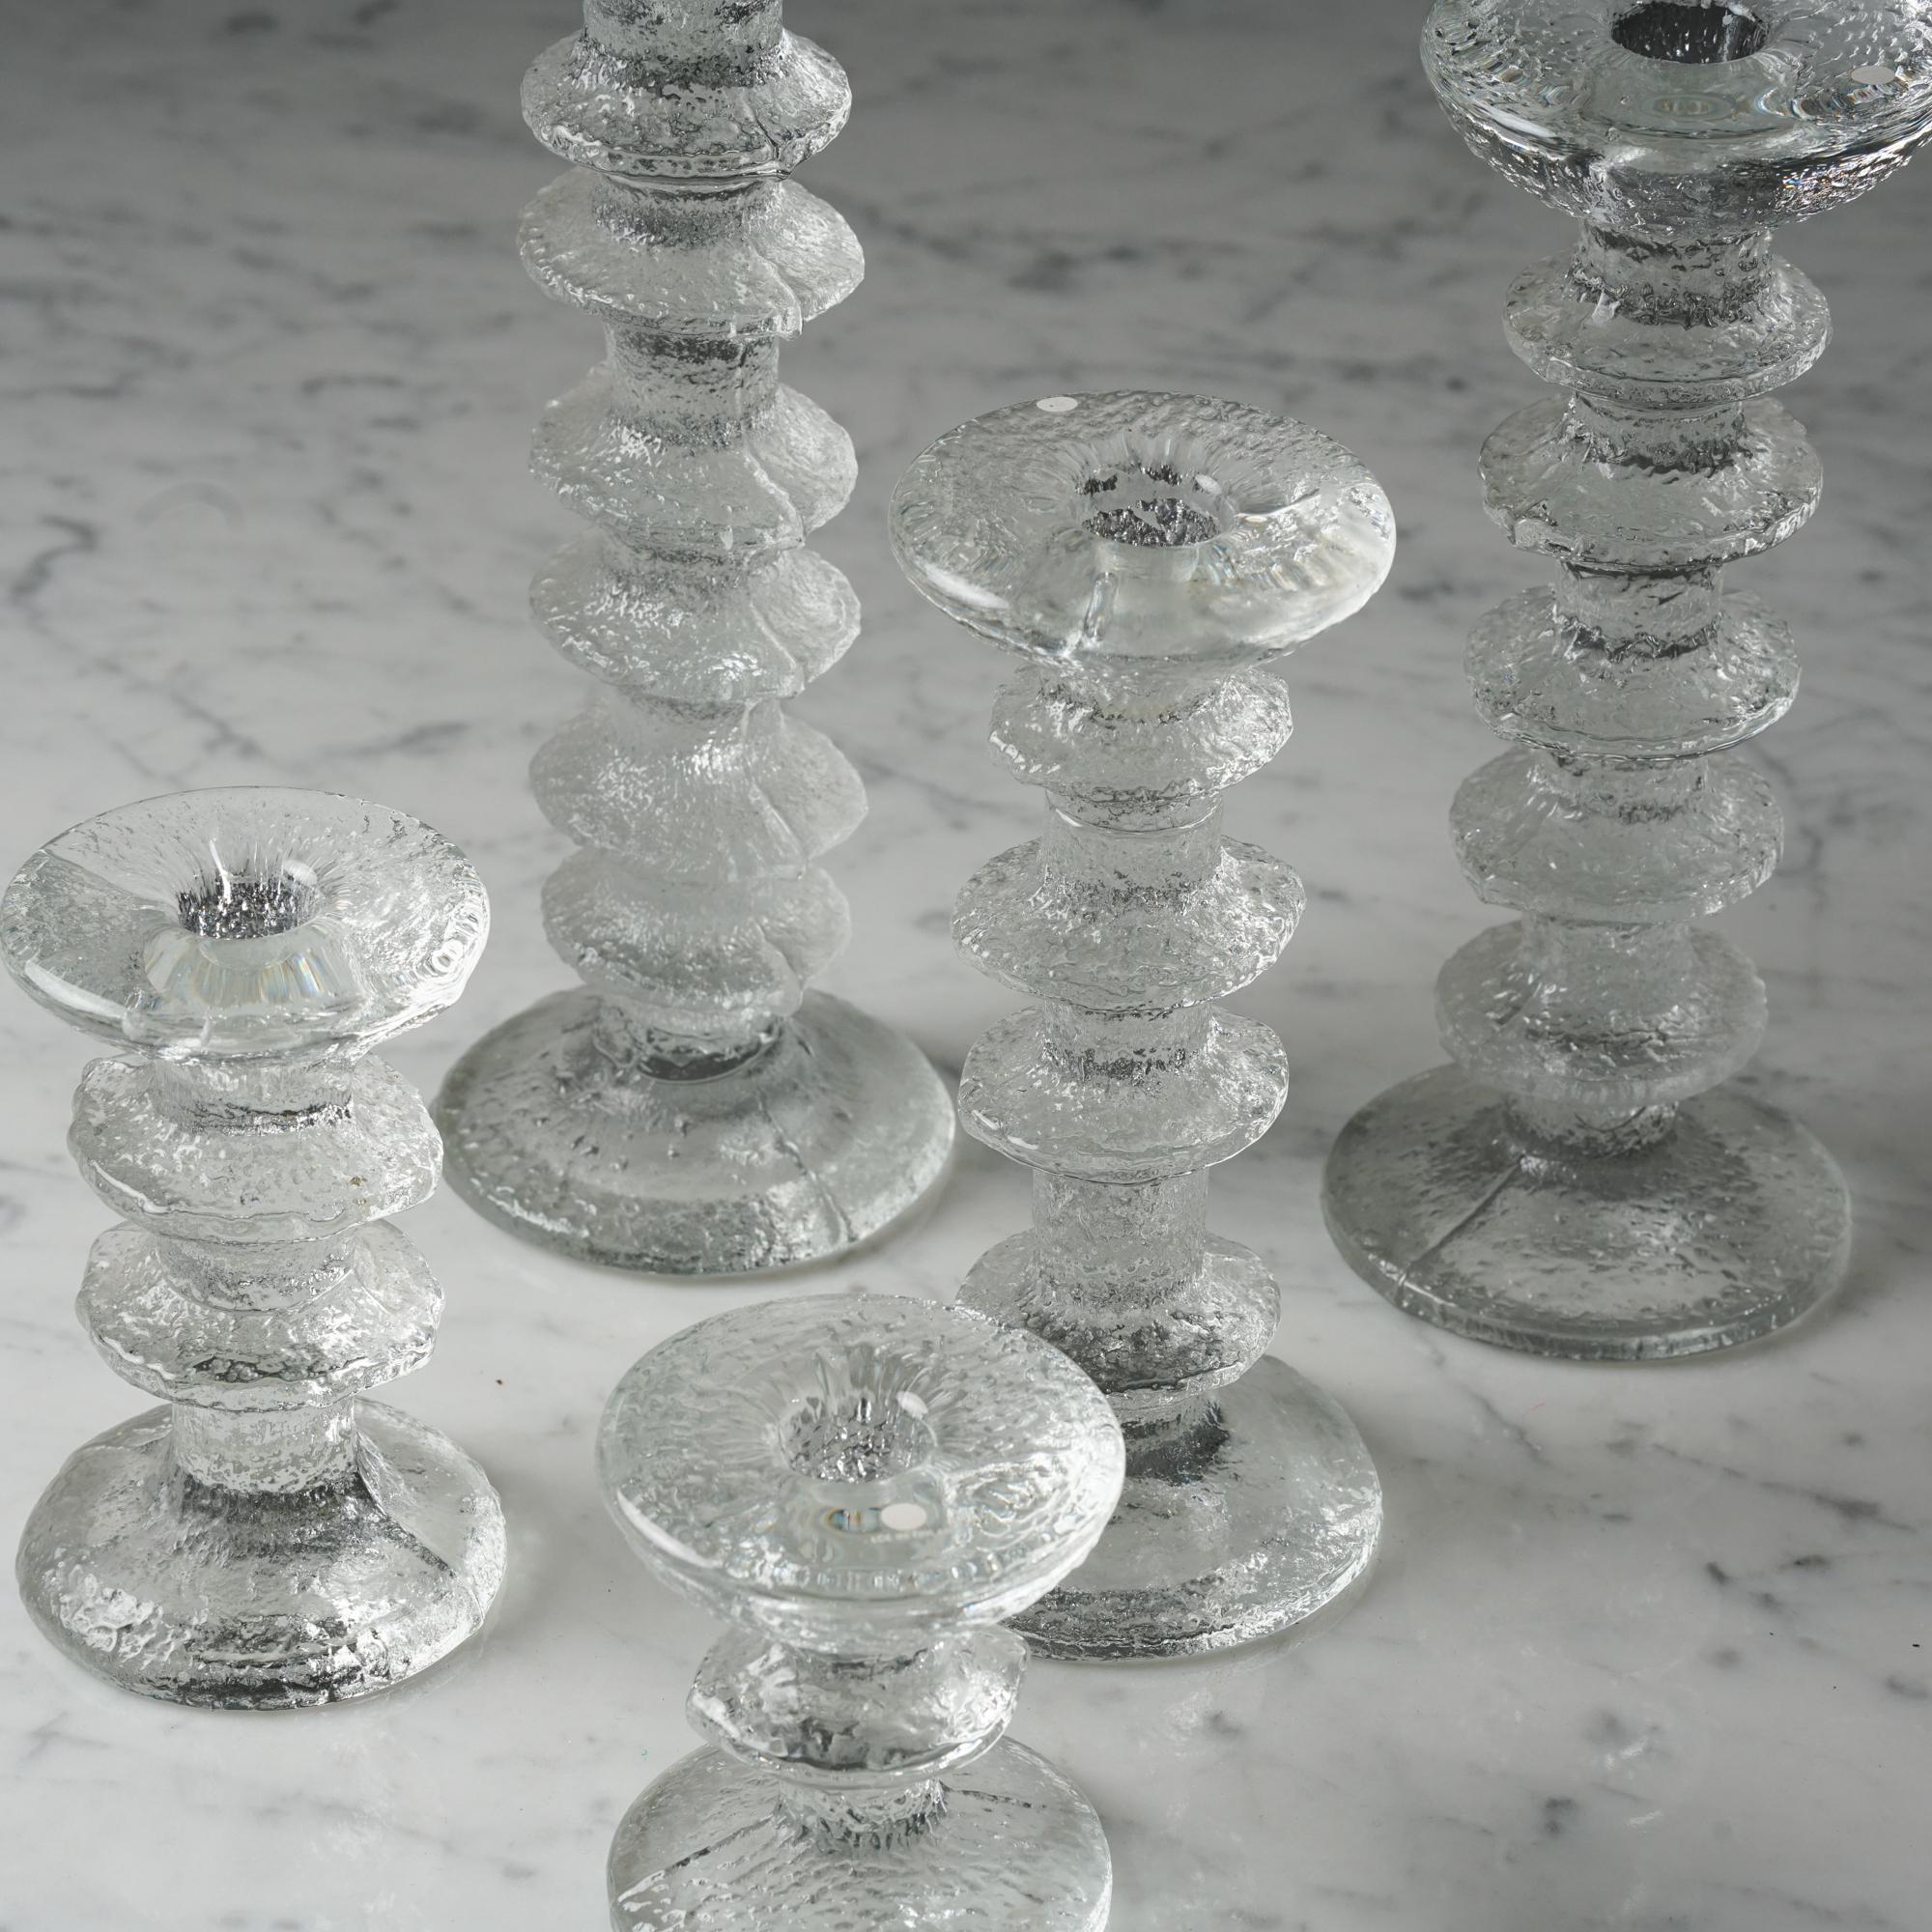 Set of five 'Festivo' candleholders by Timo Sarpaneva for Iittala, 1970s. Beautiful timeless design.

Measurements for the smallest candleholder : diameter for the bottom 7 cm, height 8 cm 
Measurements for the tallest candleholder: 9 cm, height 24